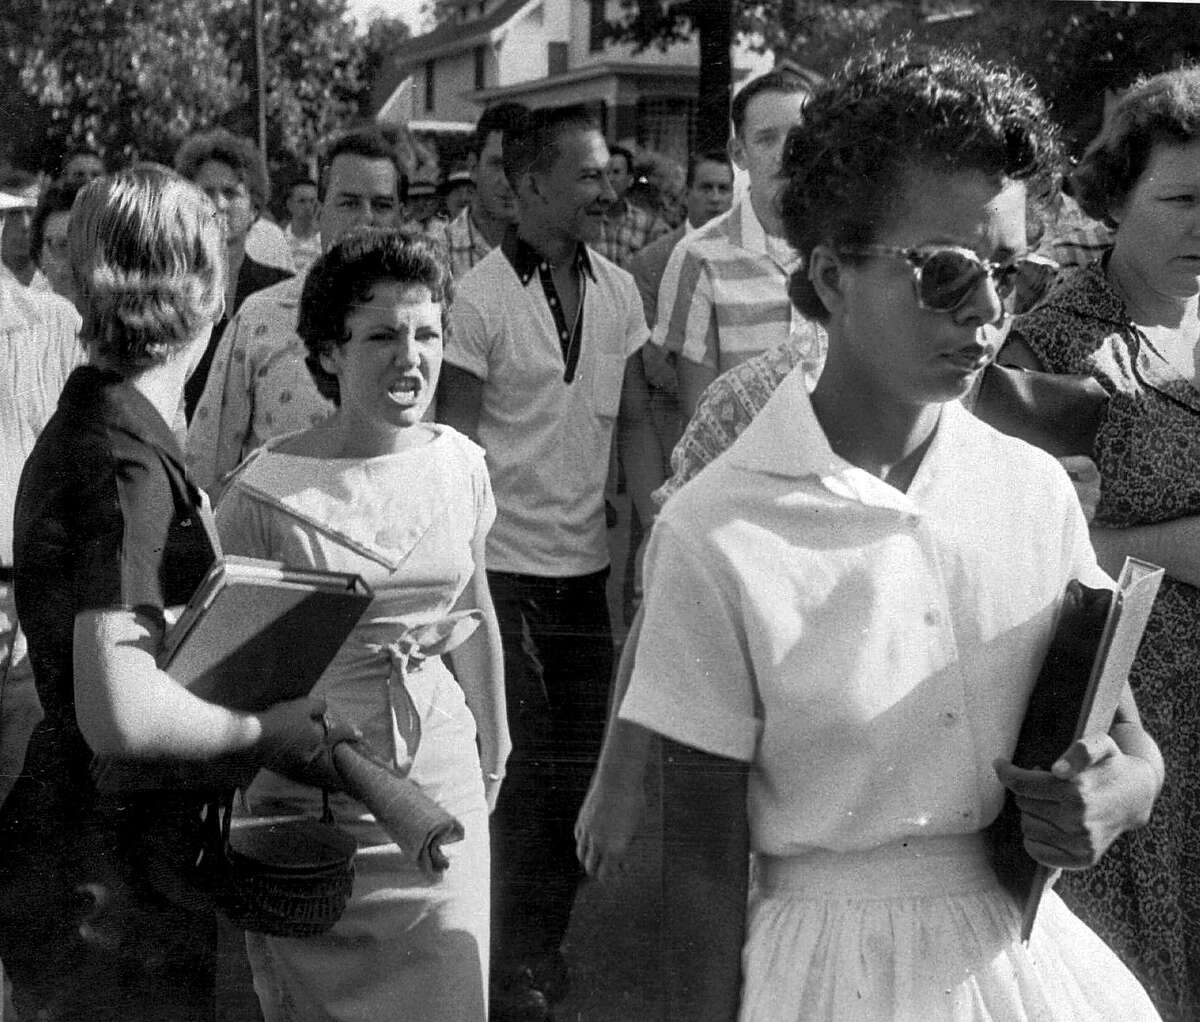 Hazel Bryan (center) and other students at Central High School in Little Rock, Ark., heckle Elizabeth Eckford as she walks by Sept. 4, 1957. Bryan later apologized to Eckford.